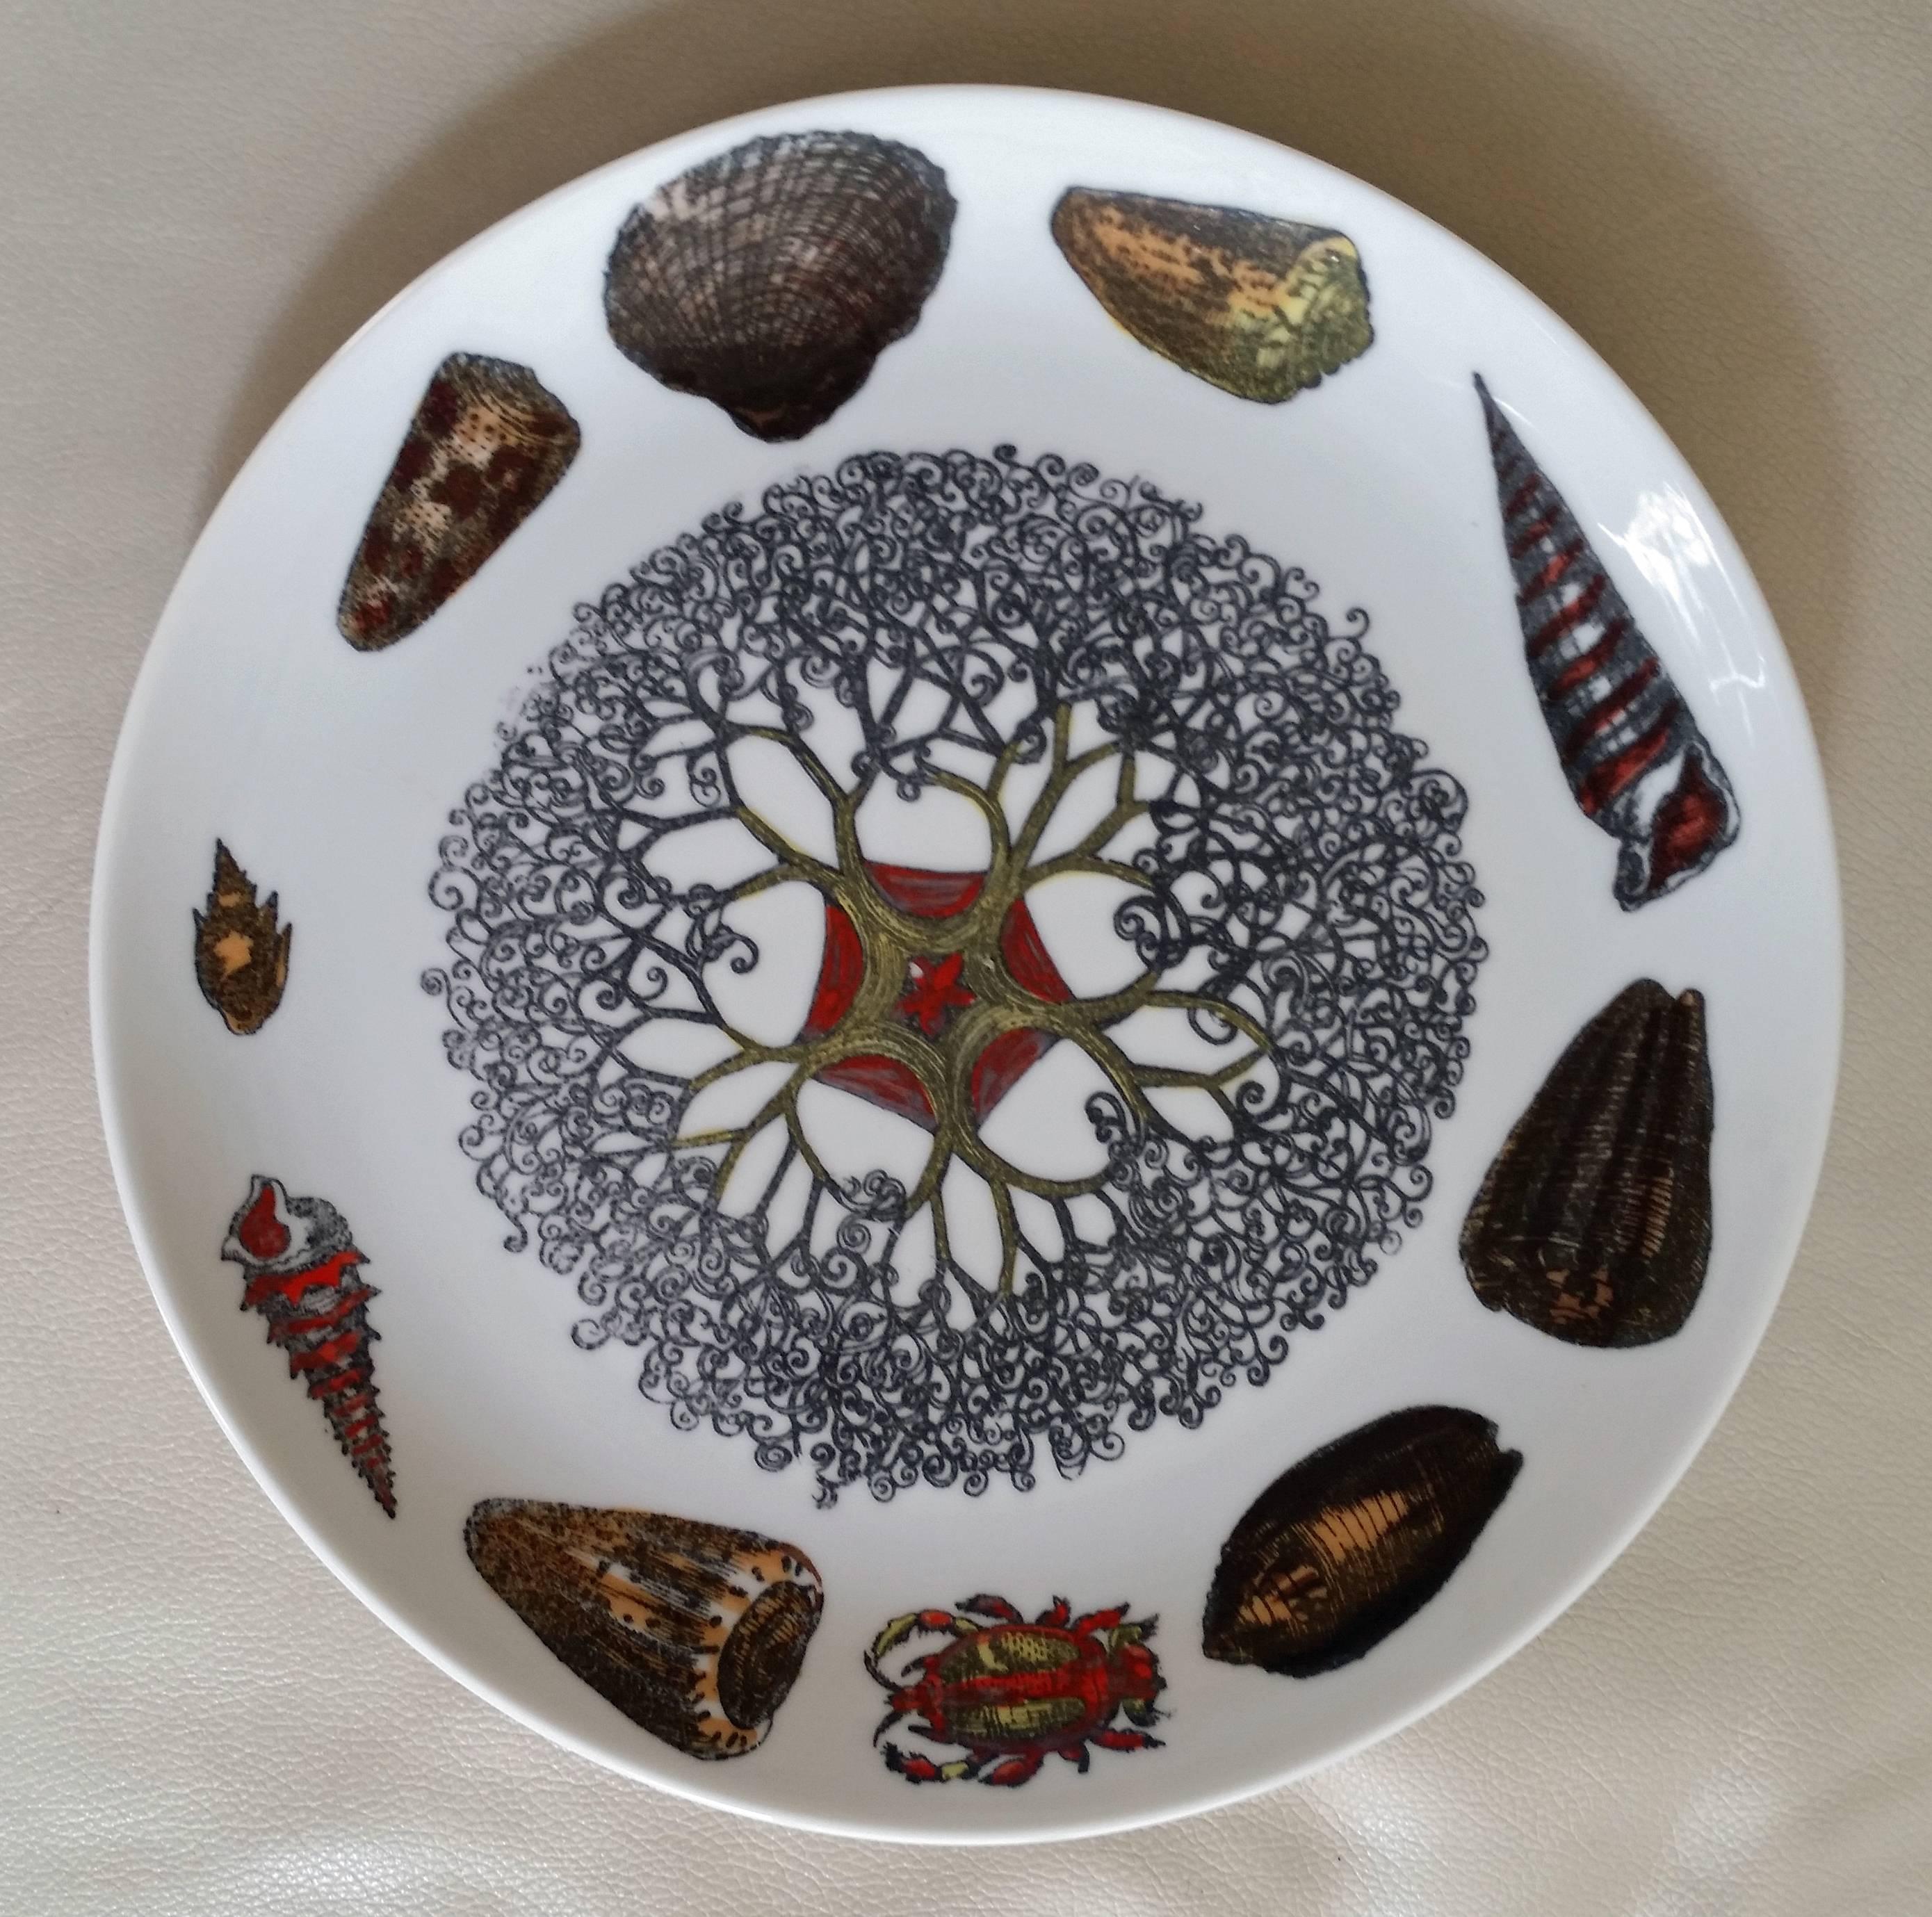 Piero Fornasetti's whimsical and colourful Conchiglie (seashell) pattern features a different sea creature filling the center well of each plate, surrounded by assorted sea animals, shells, mollusks and fishes. While many of the creatures are